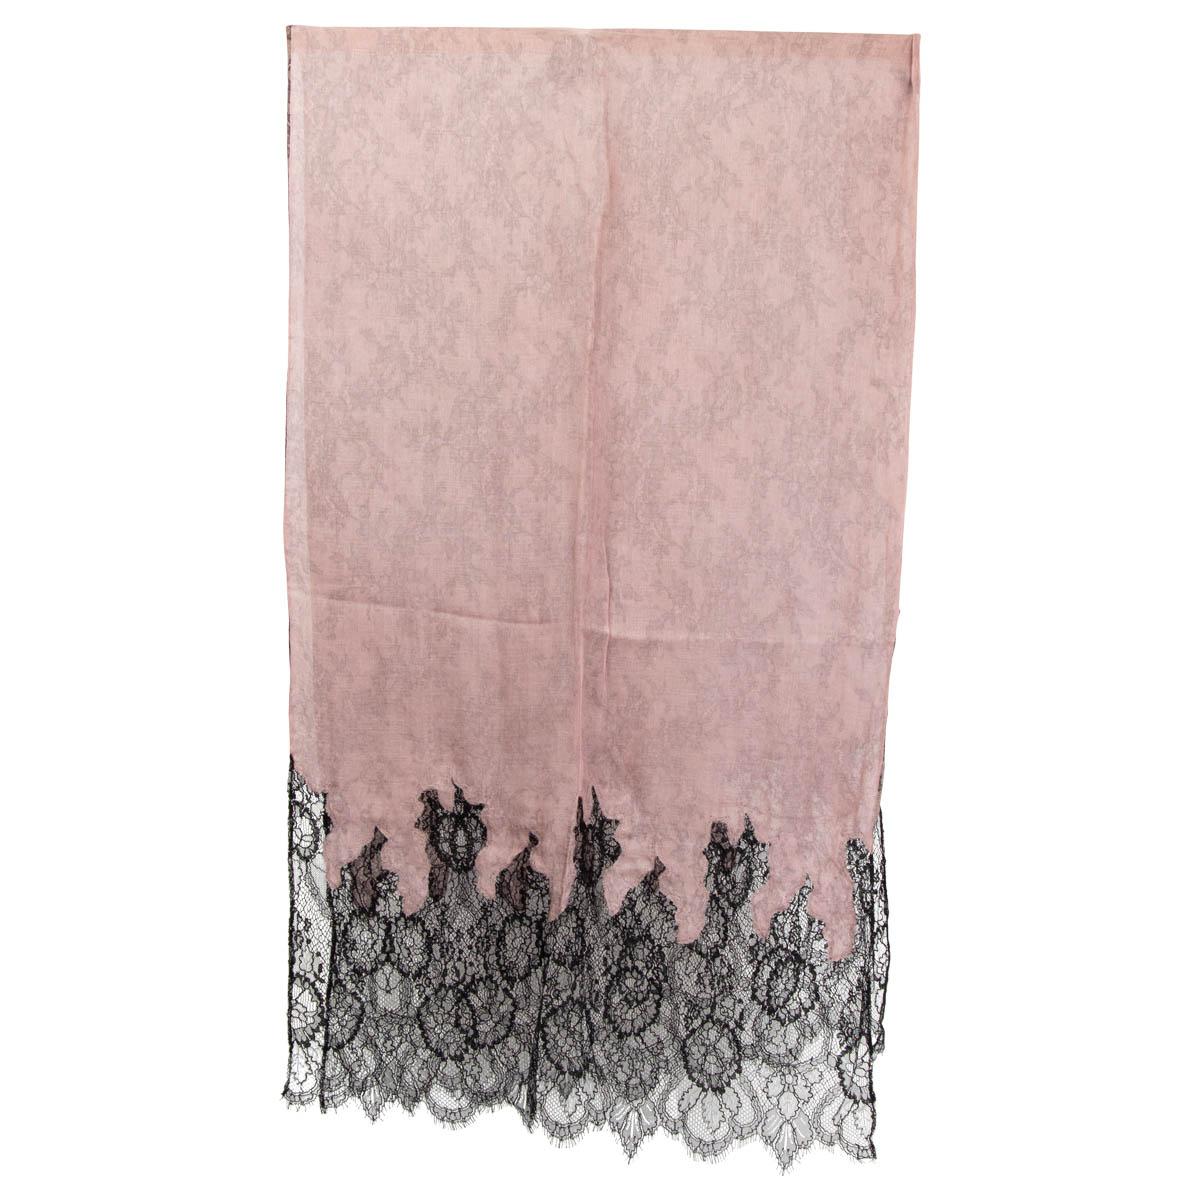 100% authentic Valentino lace printed shawl in dusty rose modal (85%) and silk (15%) with black lace trim in viscose (57%) and polyamide (43%). Has been worn and is in excellent condition. 

Measurements
Width	68cm (26.5in)
Length	230cm